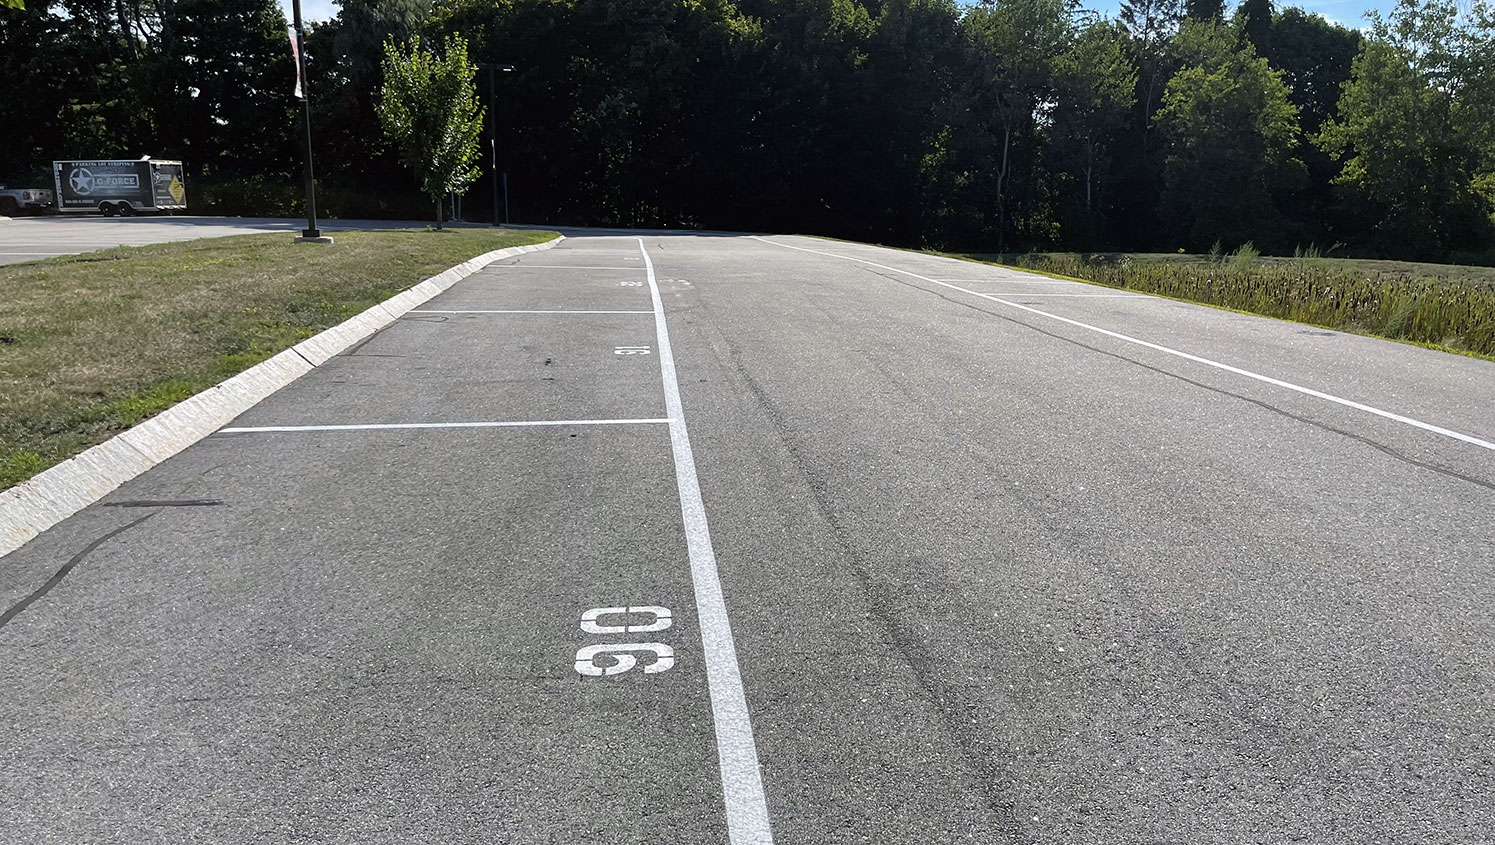 re-striped numbered parking spaces